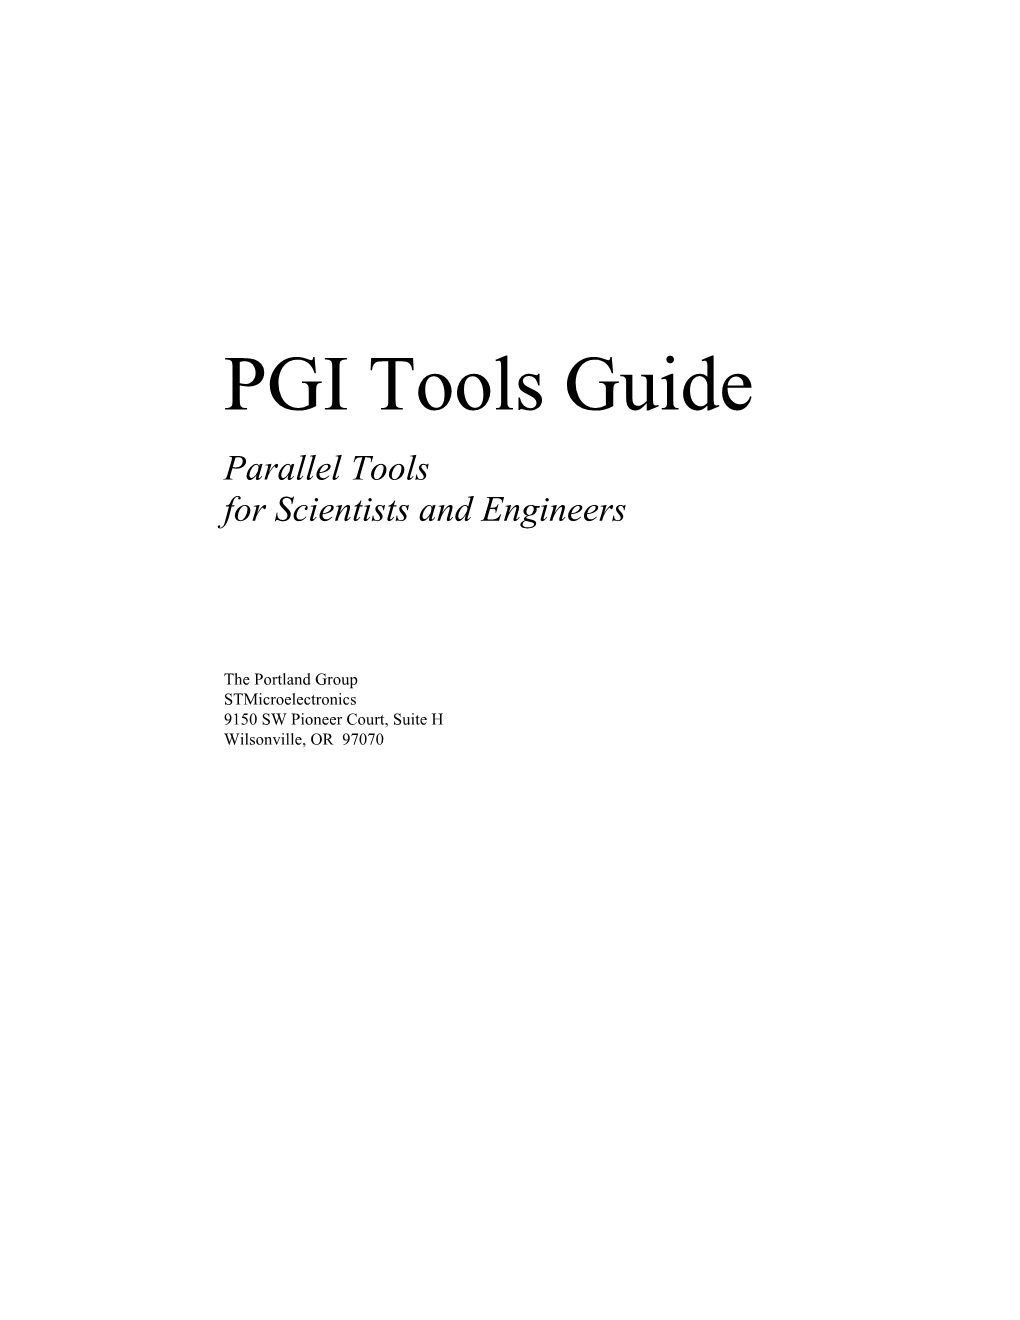 Portland Group Tools Reference